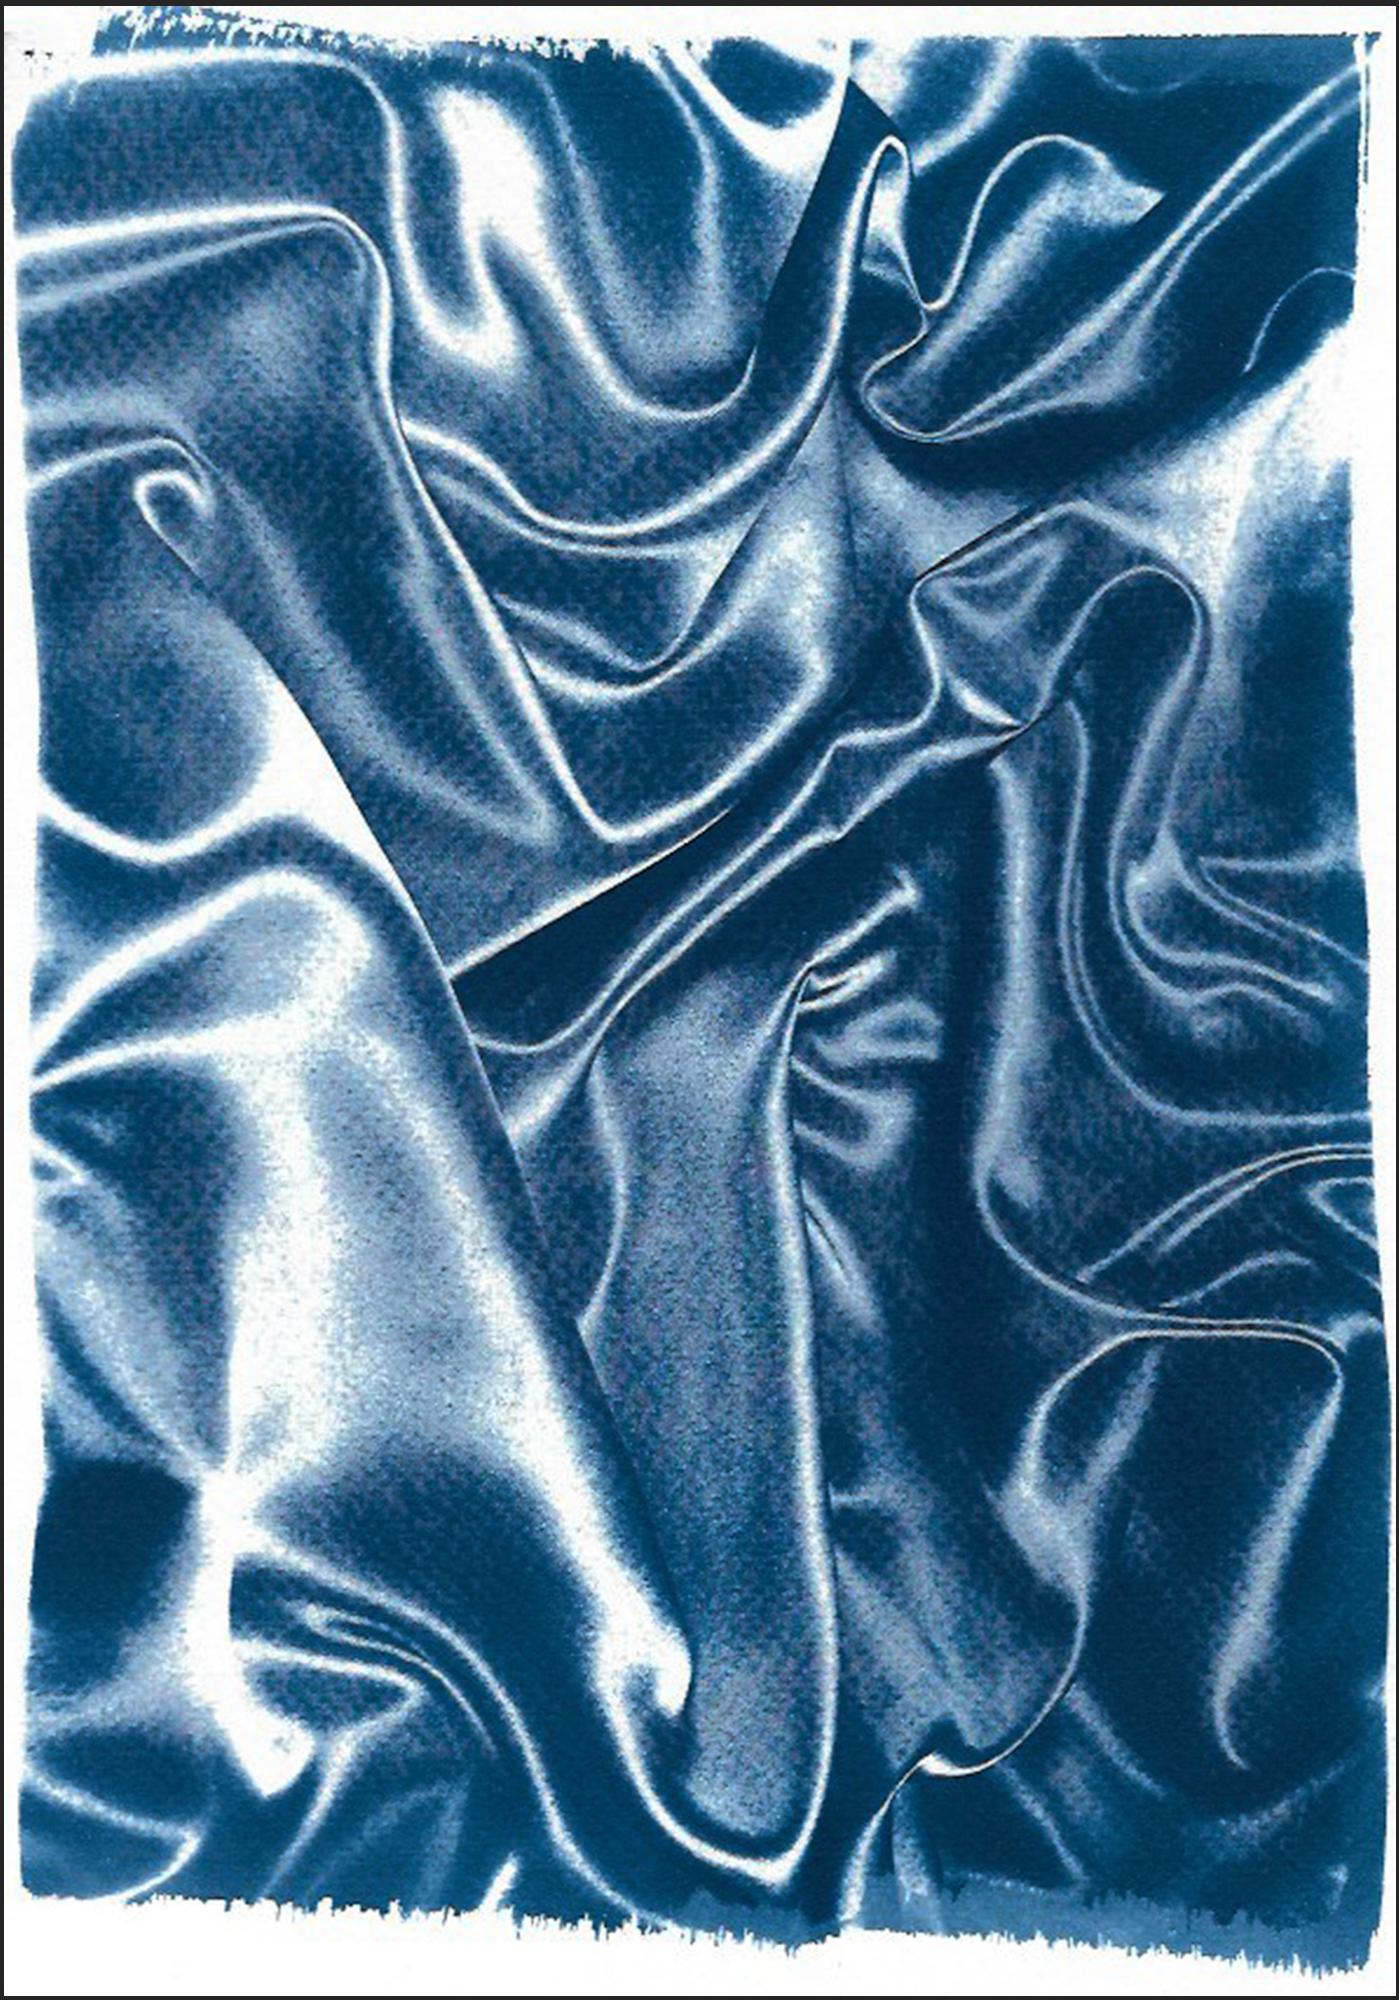 Kind of Cyan Abstract Painting - Classic Blue Silk Movement, Abstract Fabric Gestures, Contemporary Cyanotype 